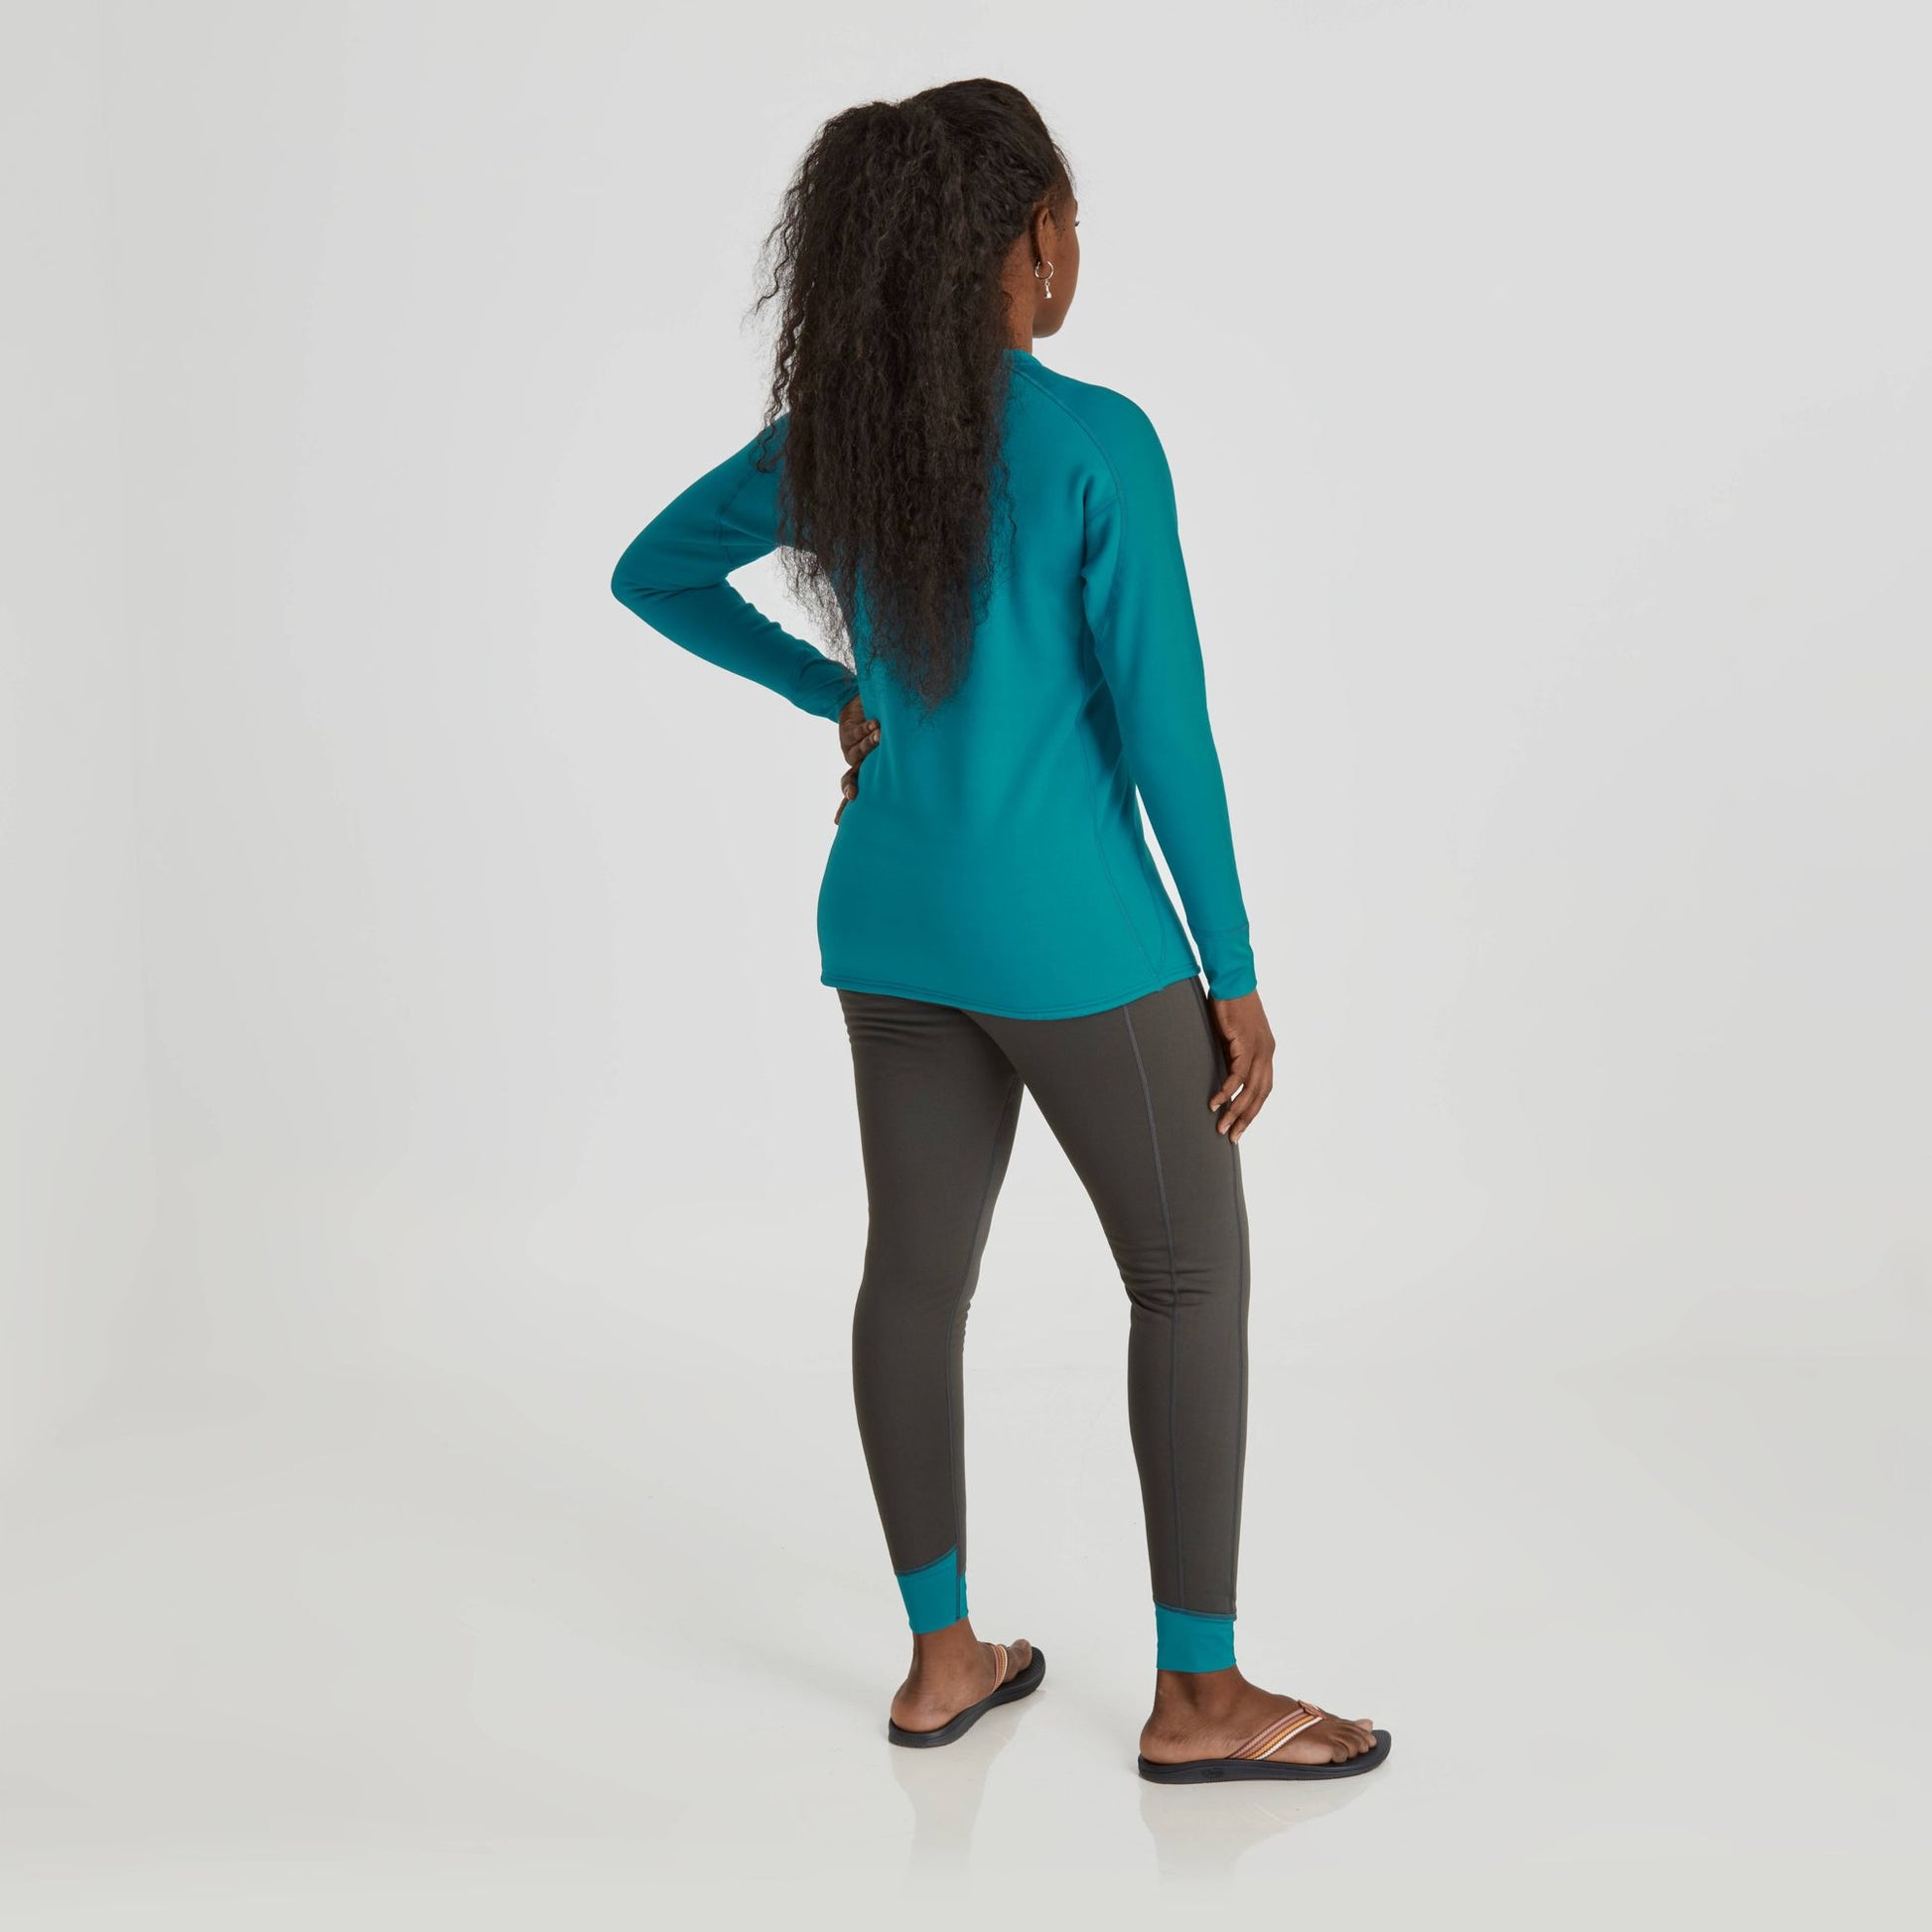 The back view of a woman wearing a teal NRS Expedition Weight Shirt - Women's and black leggings.